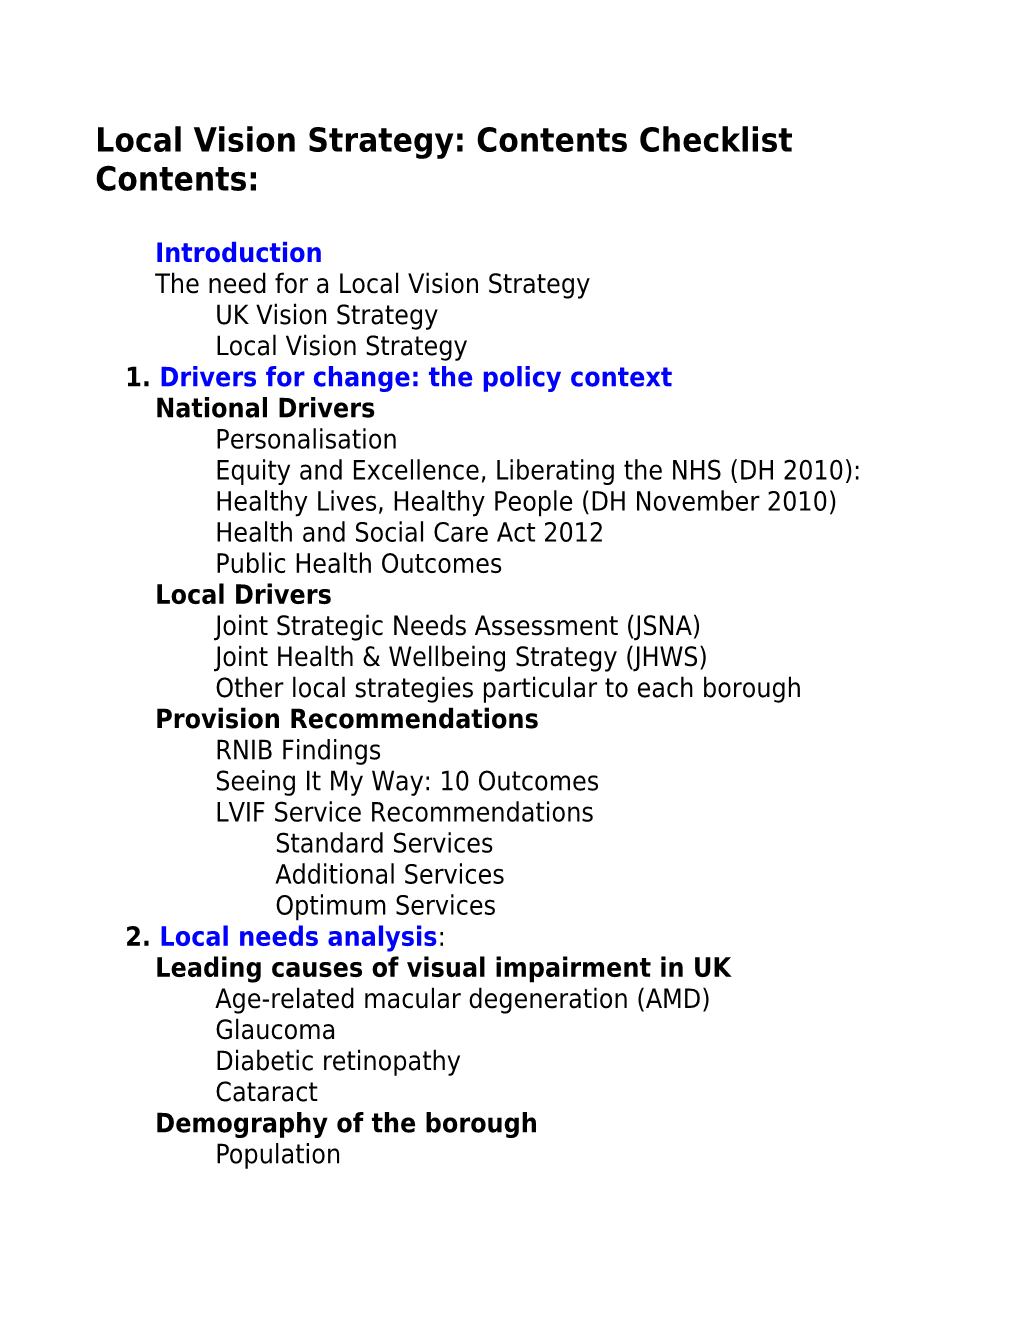 Local Vision Strategy: Sample Contents